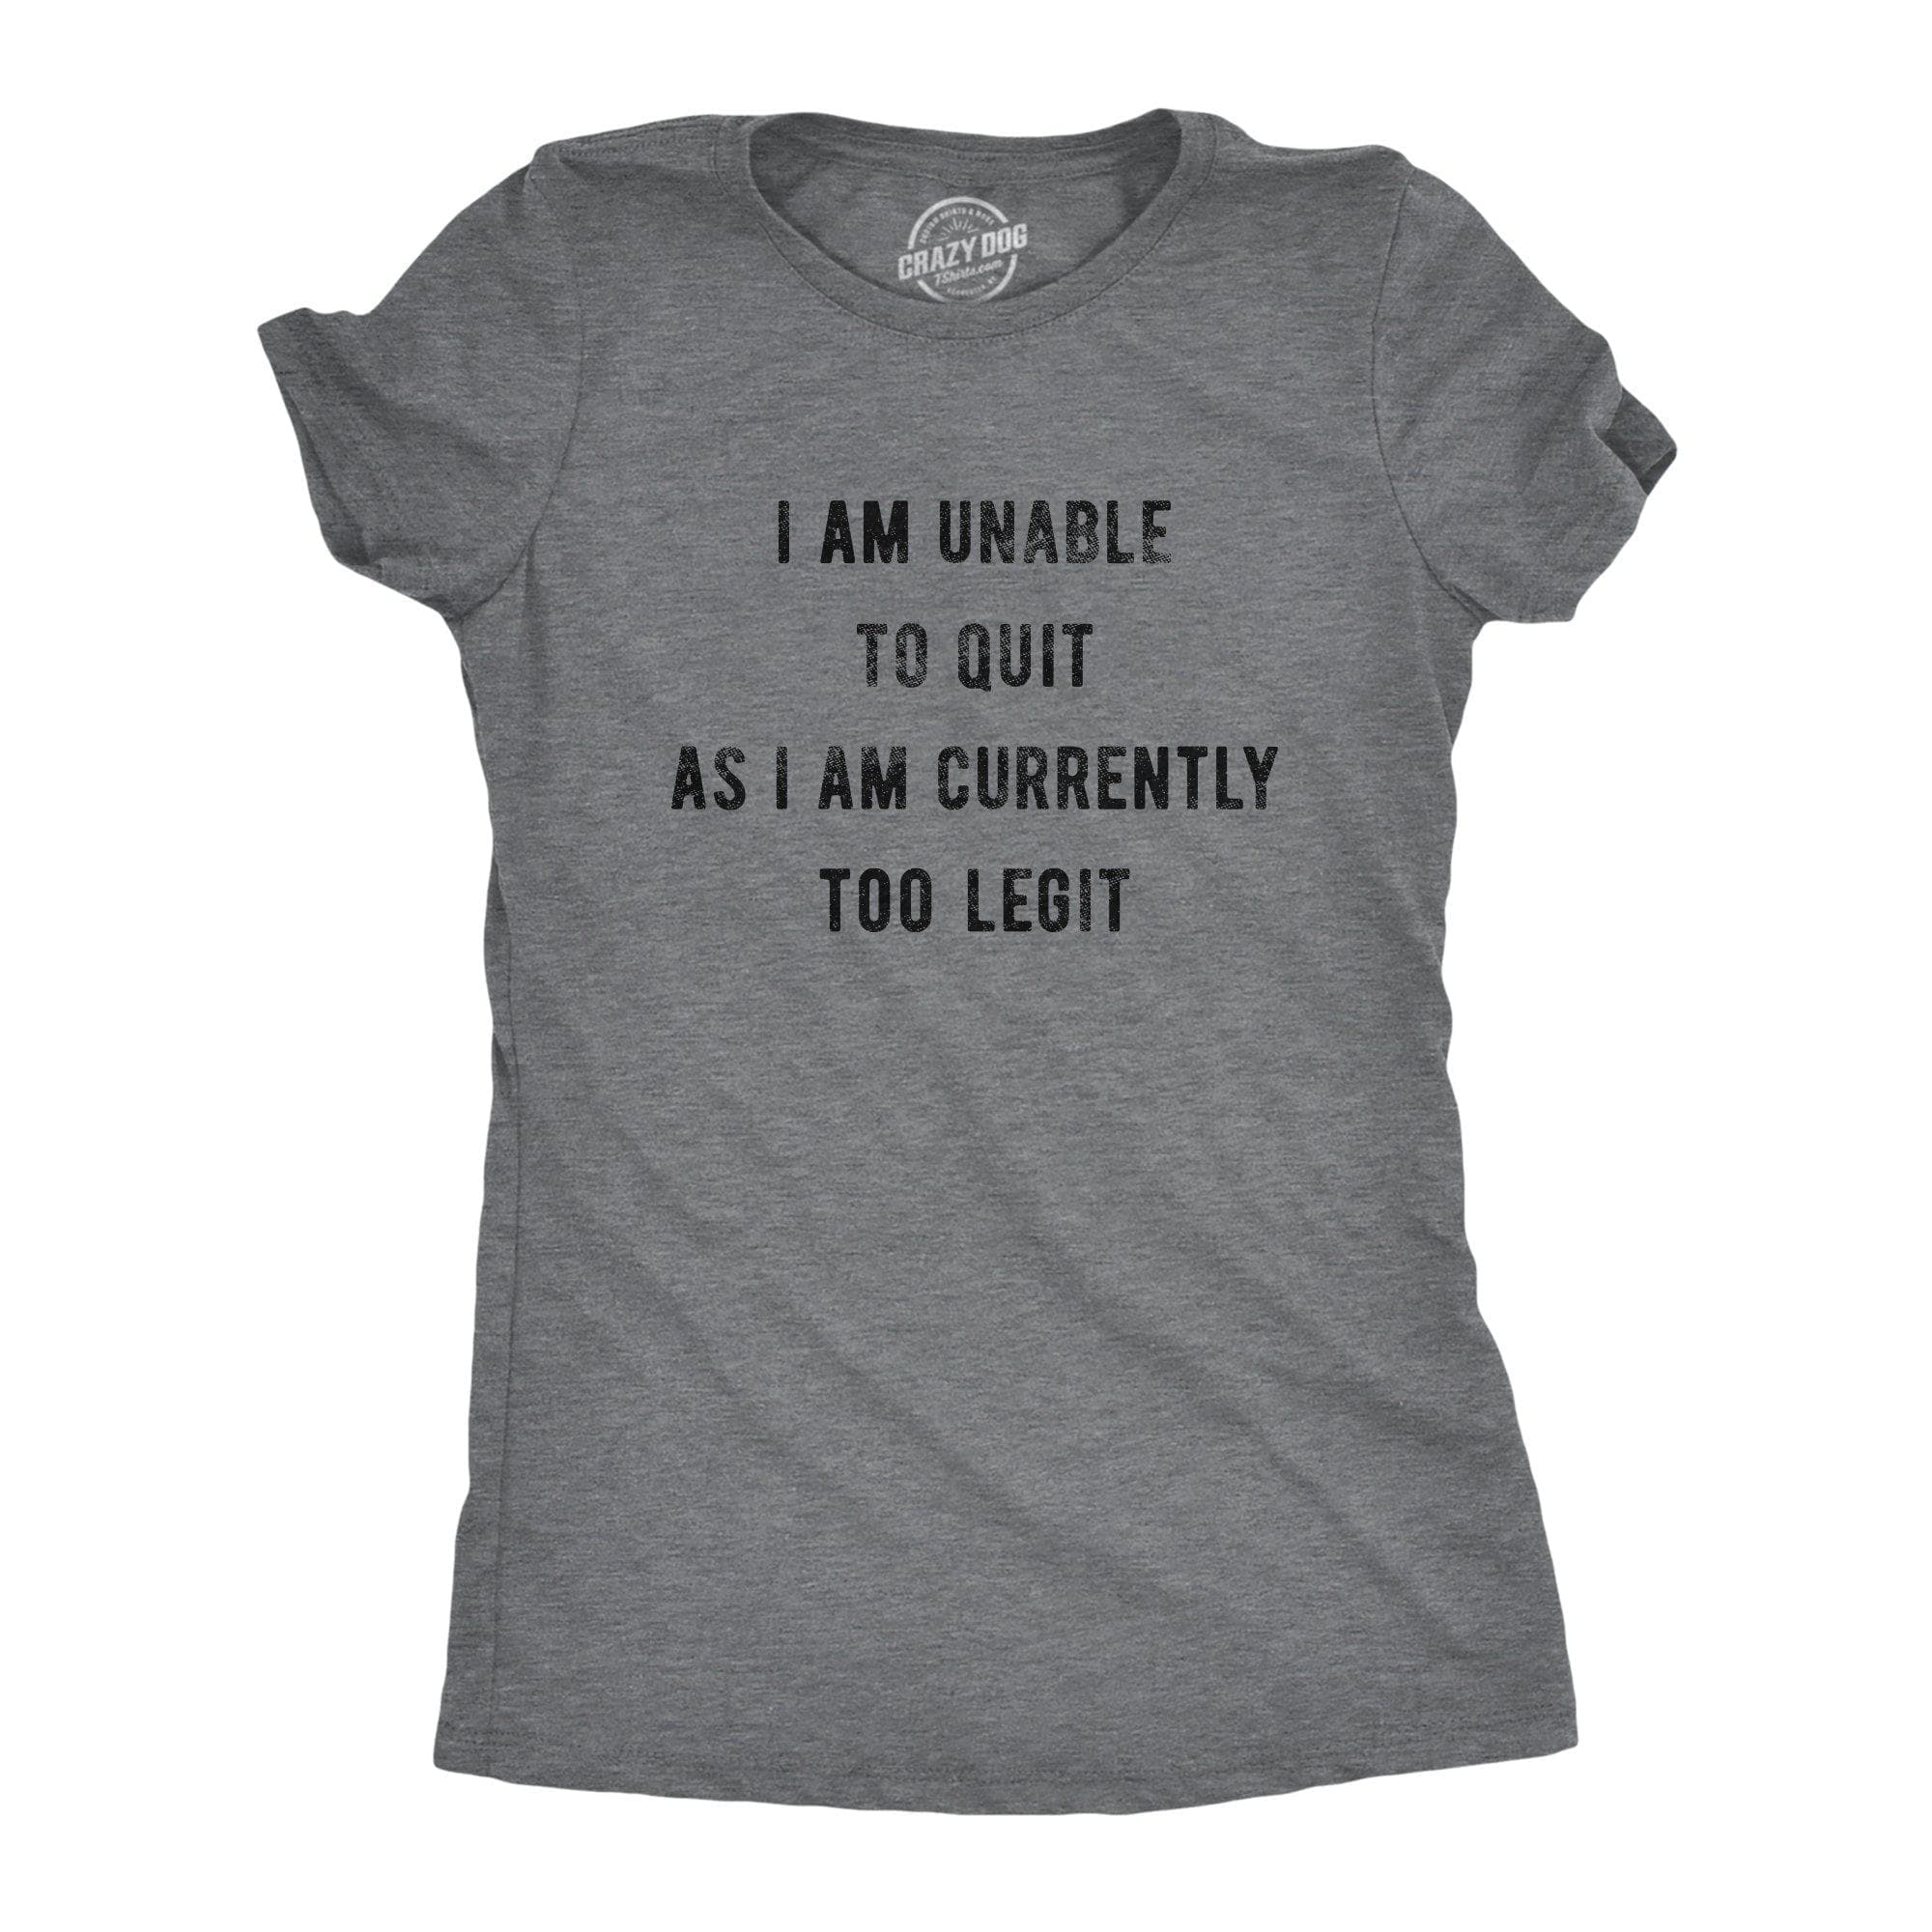 I Am Unable To Quit As I Am Currently Too Legit Women's Tshirt - Crazy Dog T-Shirts